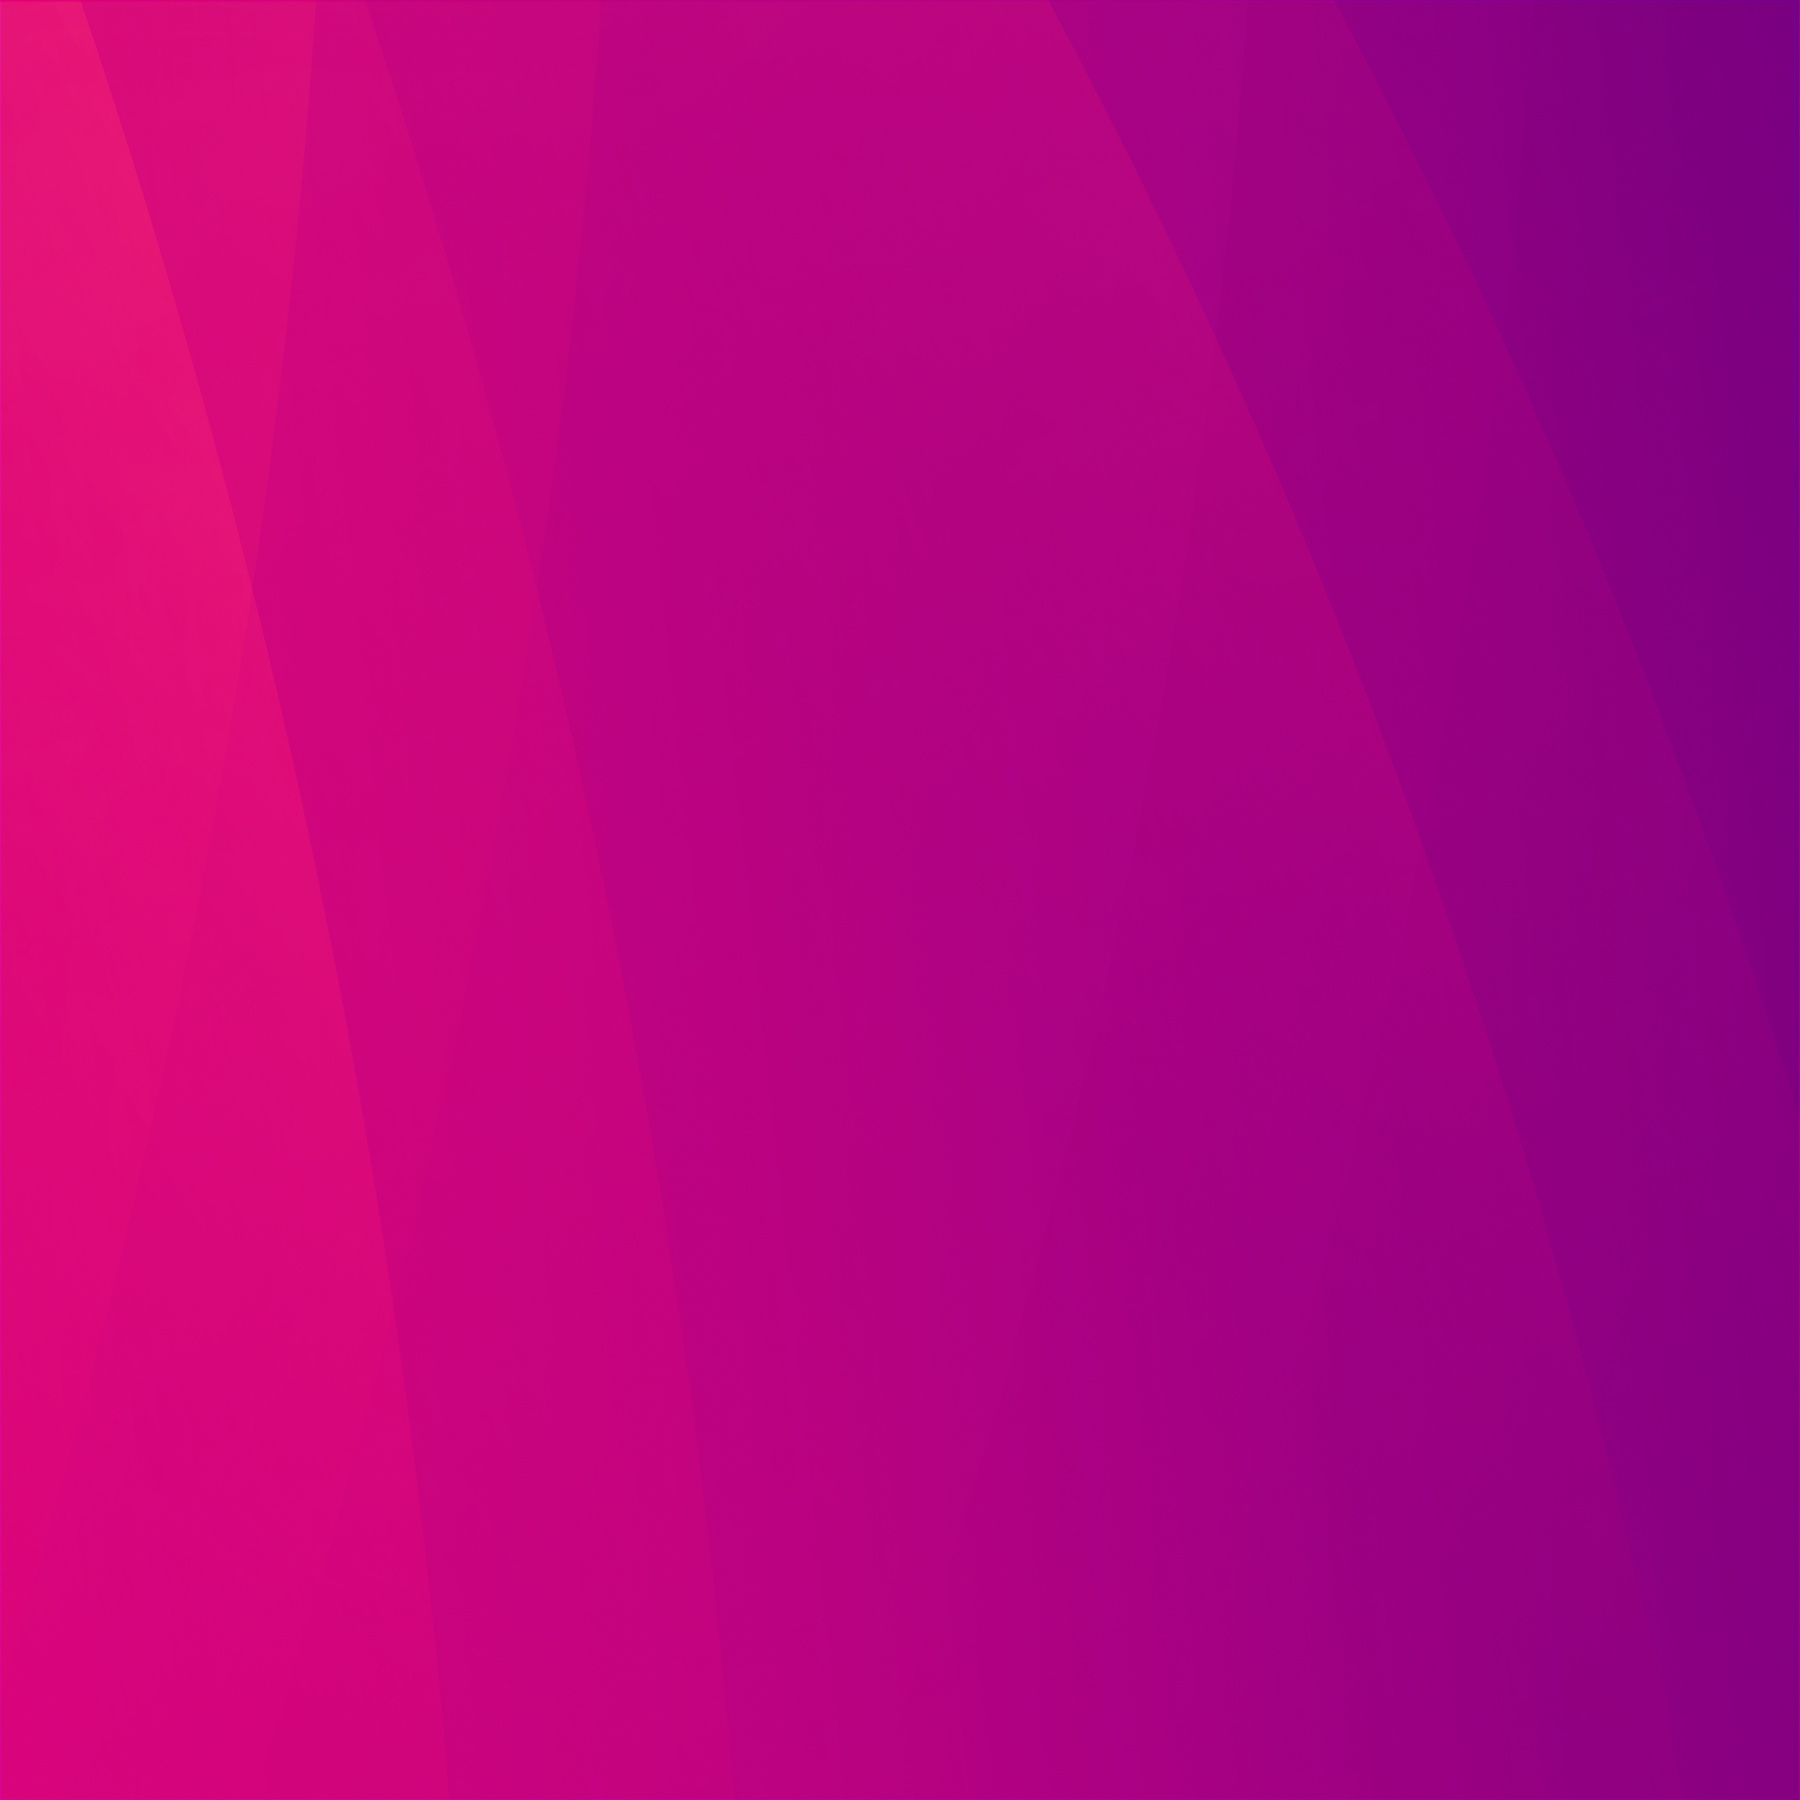 Dark Backgrounds. Pink shaded gradient design square background